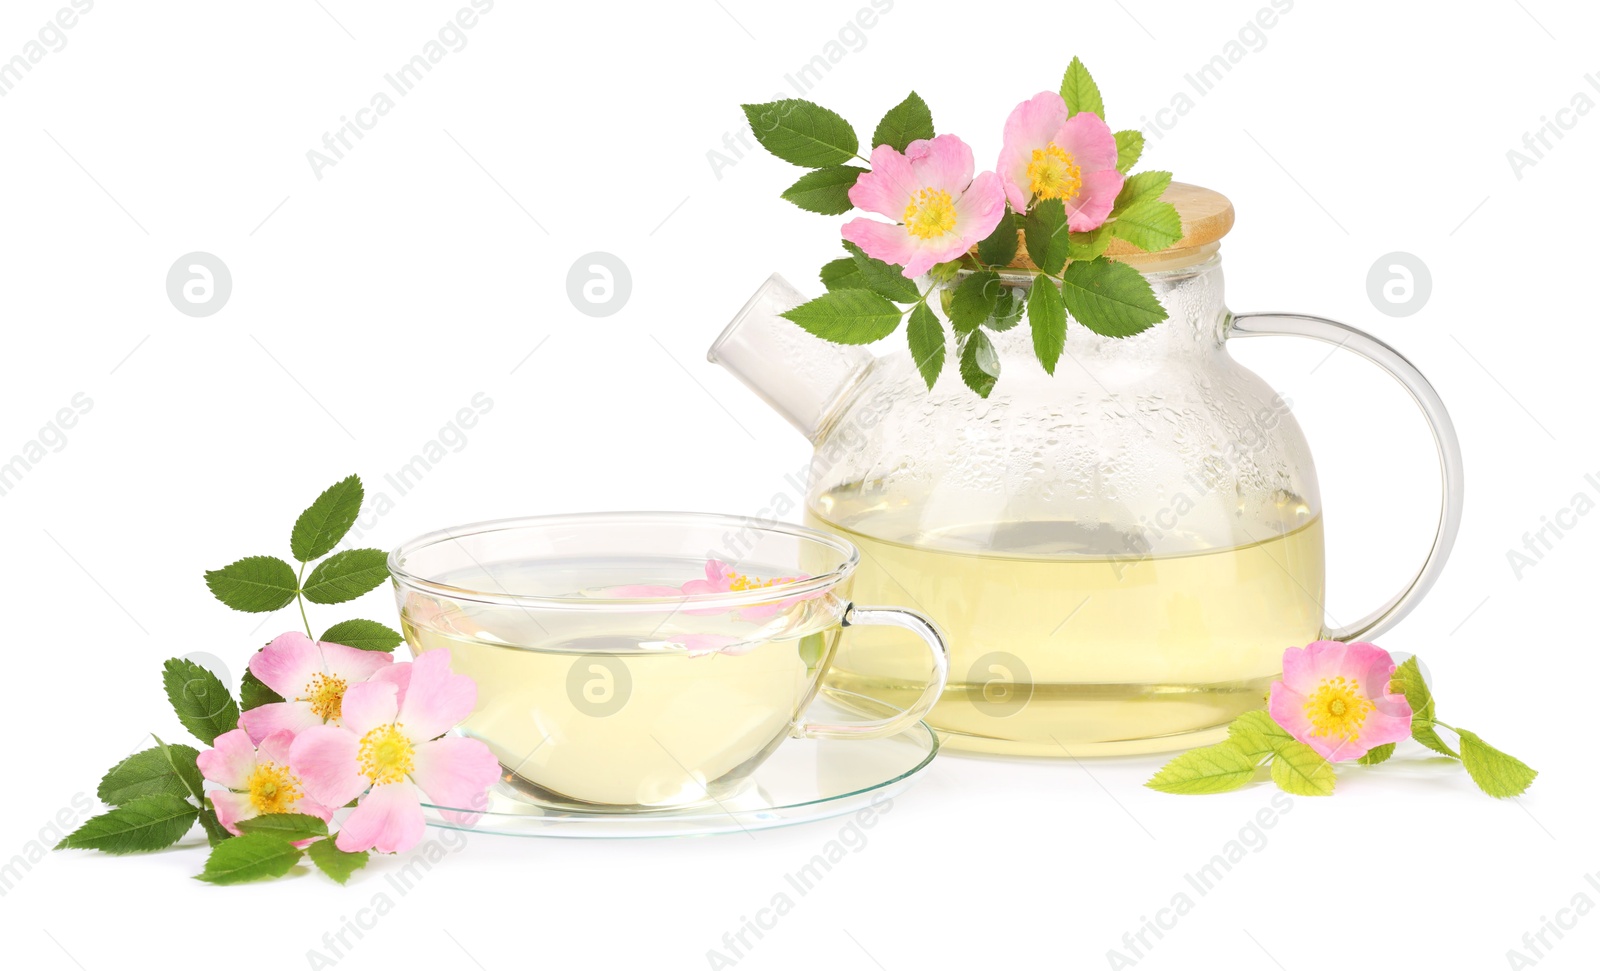 Photo of Aromatic herbal tea with rose hip flowers isolated on white